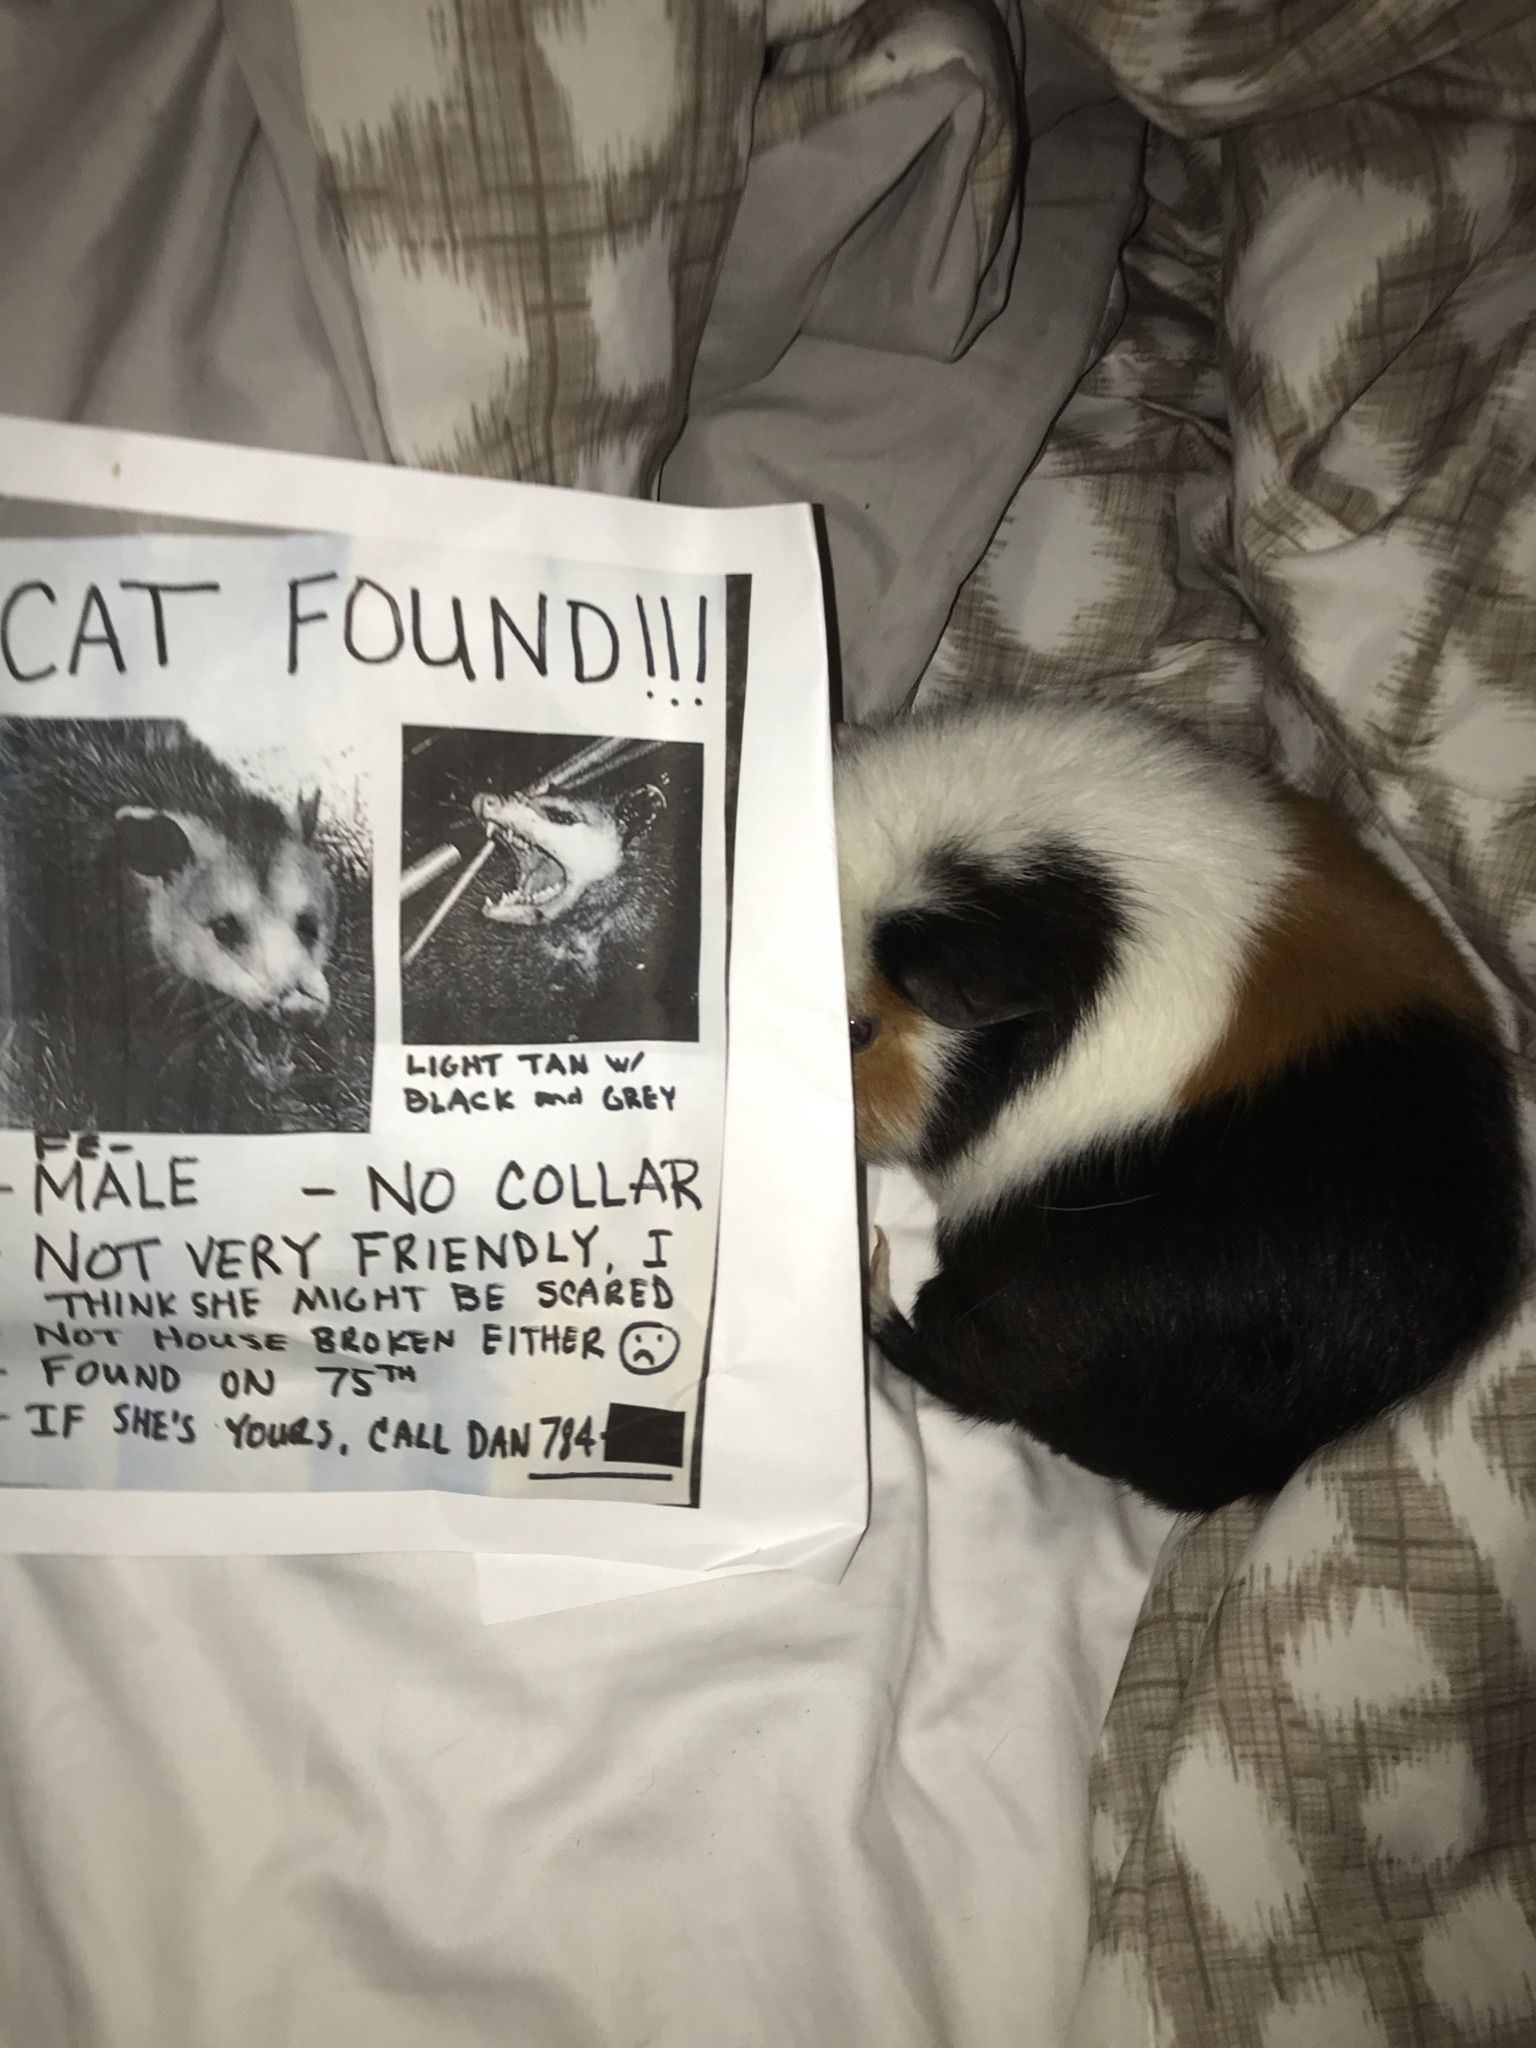 I Found The Cat In The Poster I Called The Numbers But It Was Disconnected 2 - August 26th 2020 :)...
August 26th 2020 :)
